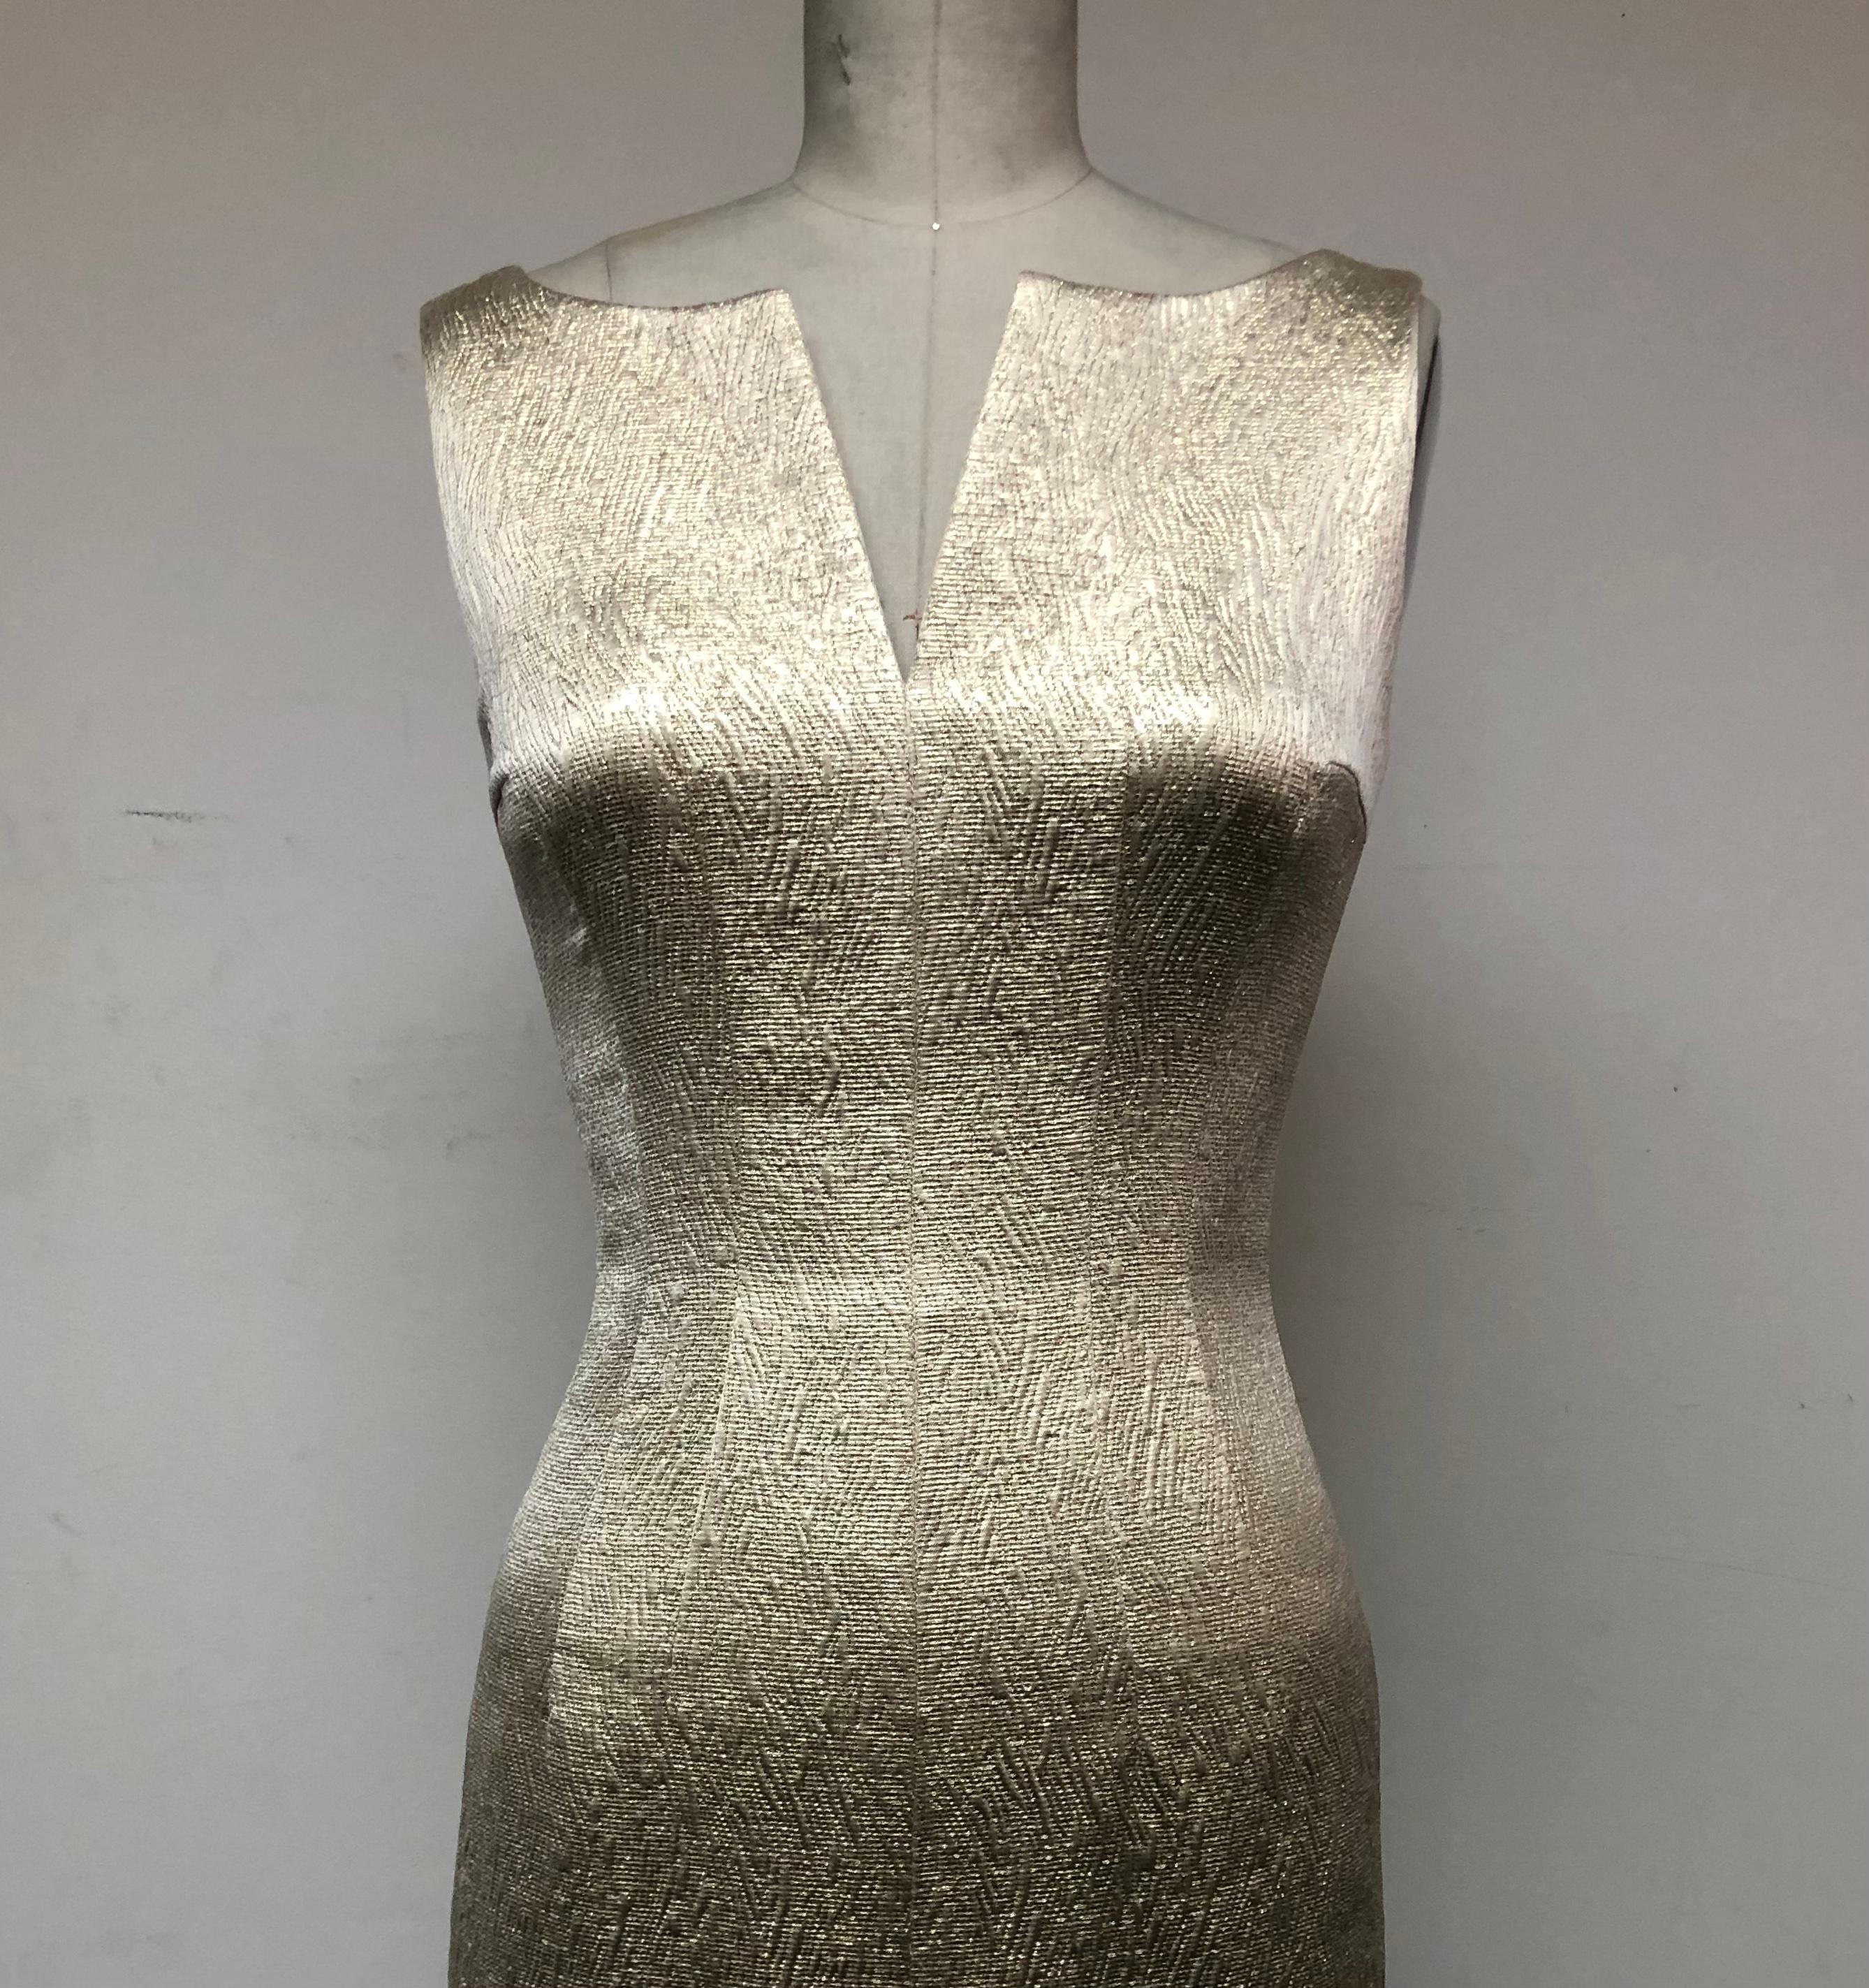 Classic timeless Hollywood! Woven gold French brocade column gown with split bodice and front slit. Fully silk-lined, this comfortable and elegant dress fits like a glove and has just the right amount of shimmer. Strikingly sensual, its double front